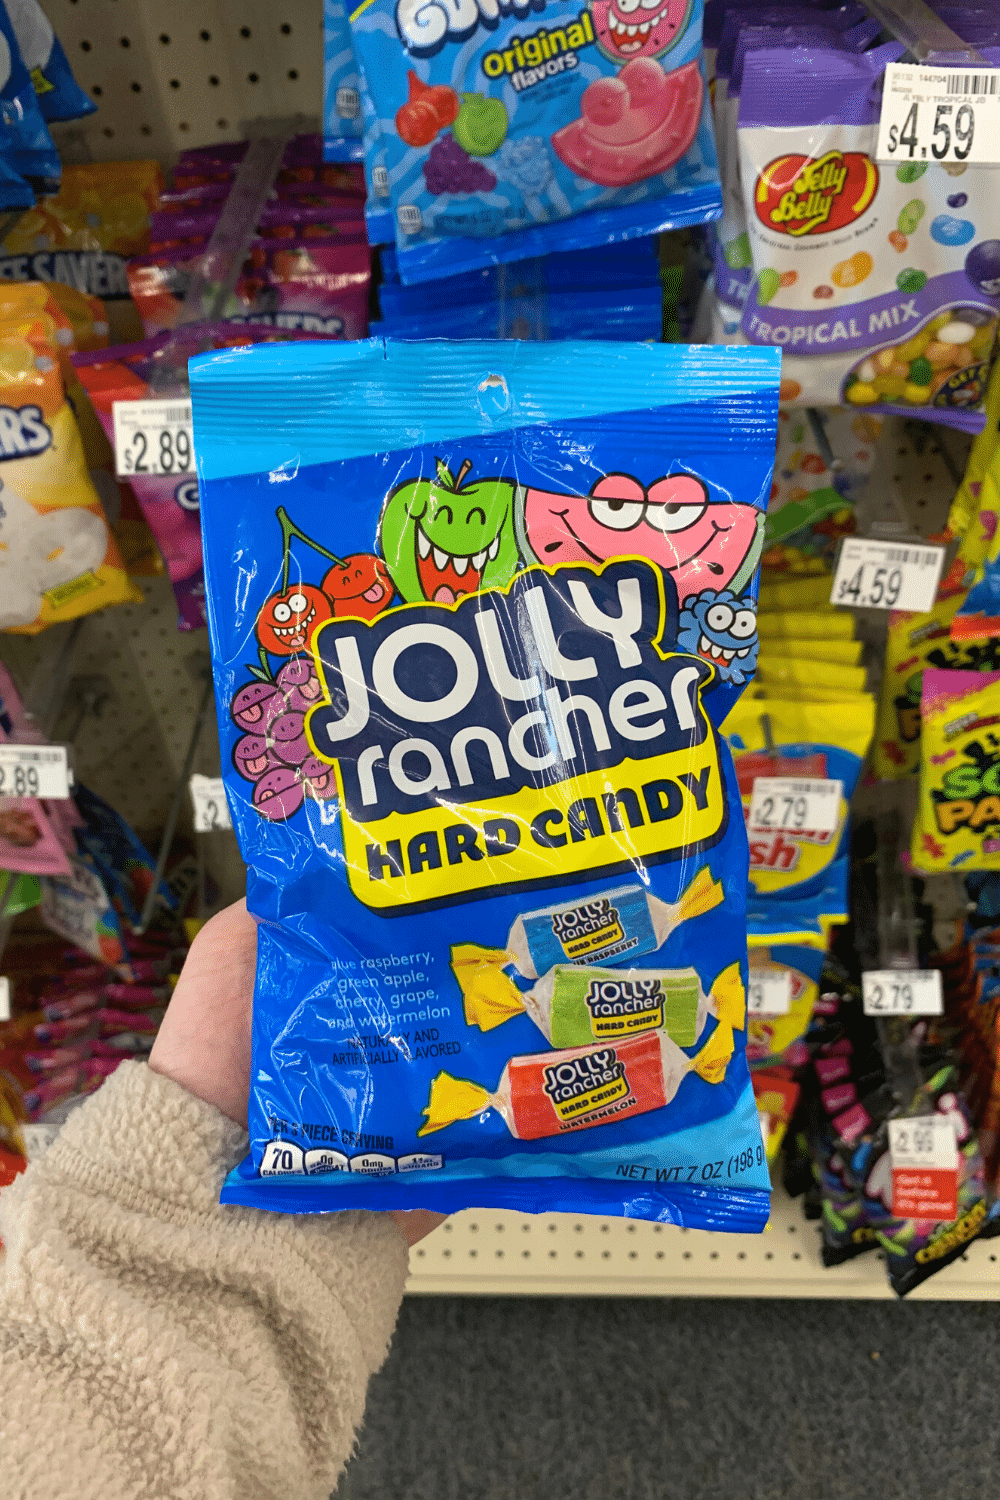 A hand holding a bag of Jolly Rancher hard candy